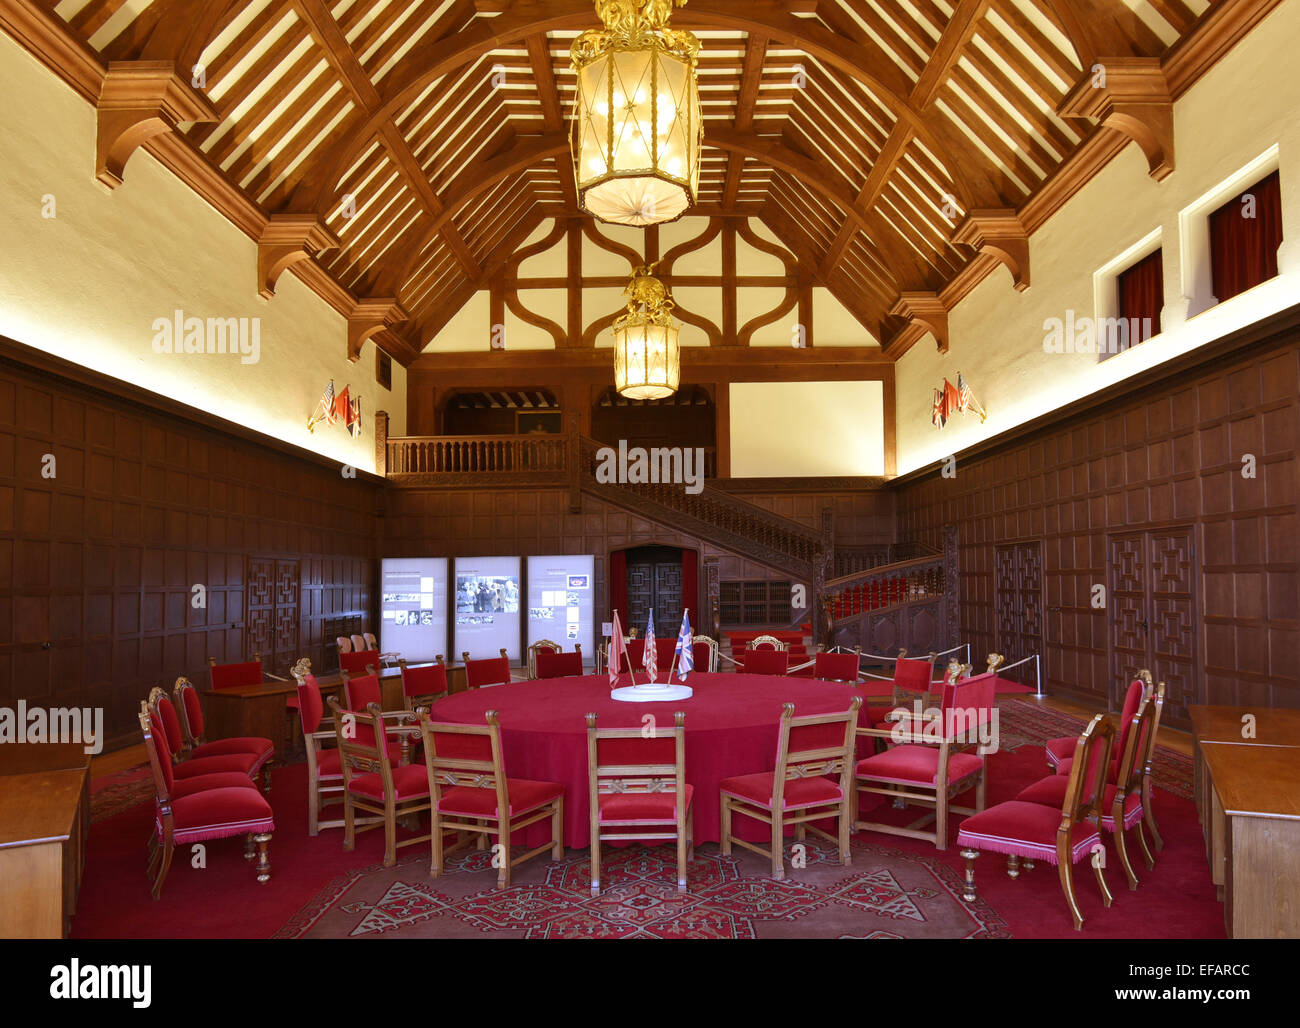 Potsdam, Germany. 30th Jan, 2015. The conference room of Schloss Cecilienhof in Potsdam, Germany, 30 January 2015. From 17 July - 2 August 1945, Winston Churchill (GB), Harry S. Truman (USA) and Josef Stalin (USSR) led delegations to discuss the future of Europe and Germany after the war. PHOTO: RALF HIRSCHBERGER/dpa (/NO SALES) © dpa/Alamy Live News Stock Photo